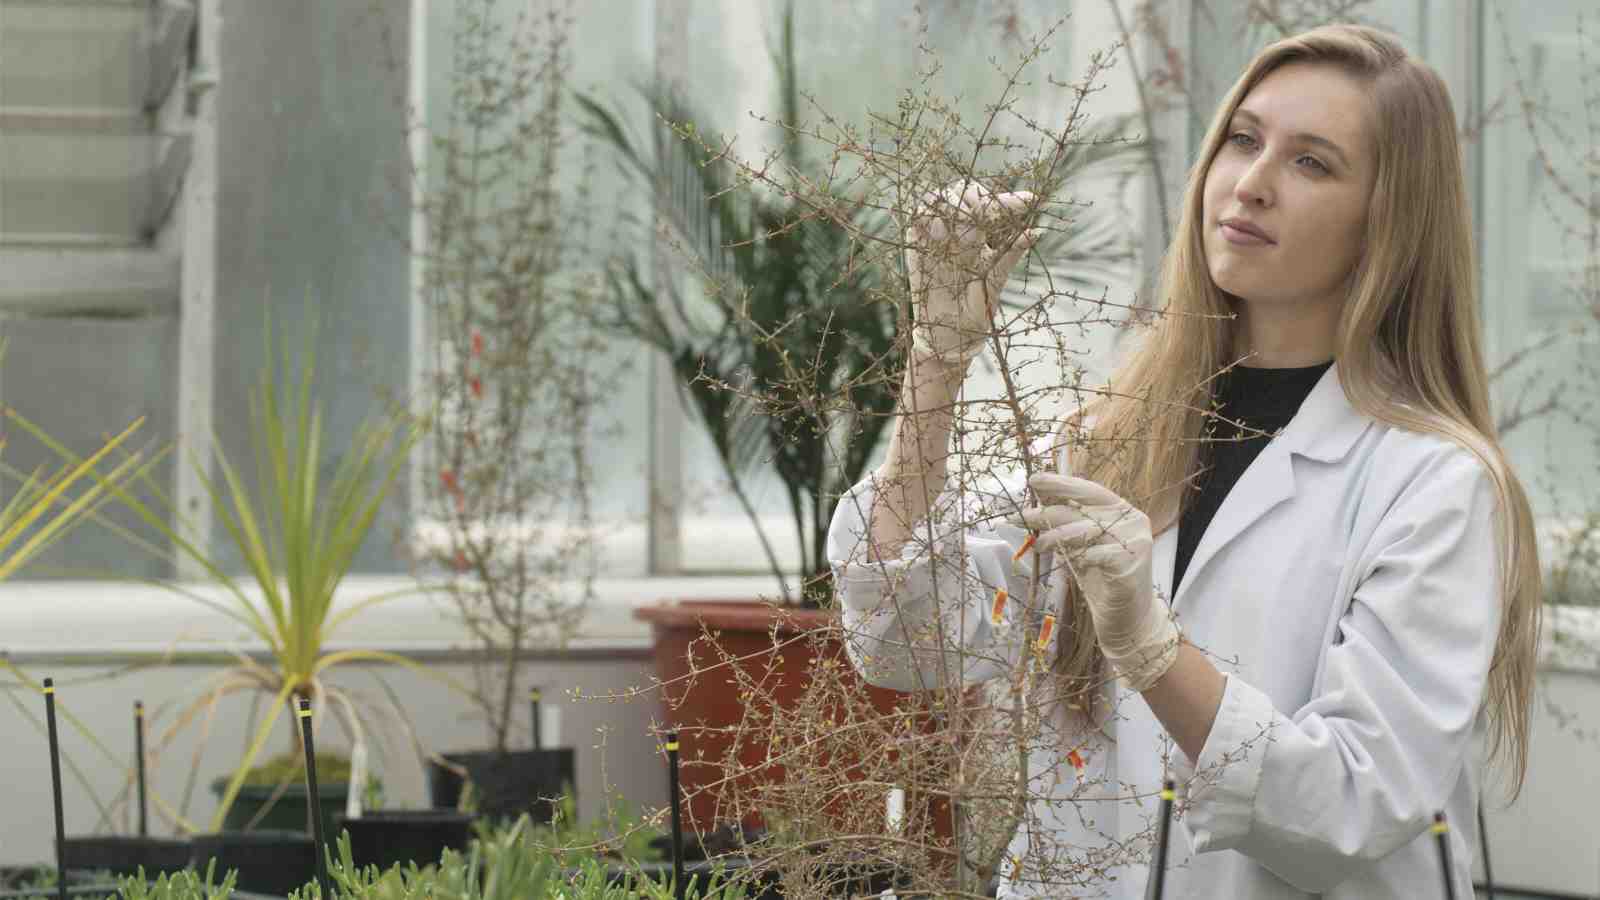 A PhD candidate in biotechnology examining a plant.